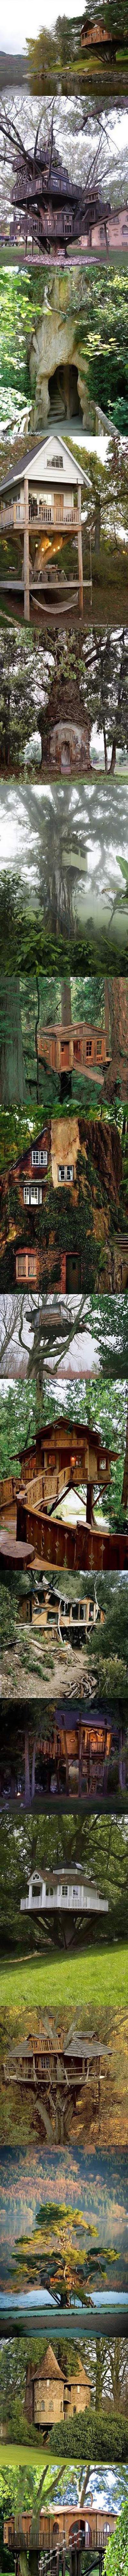 I Need A Grownup Tree House In My Life